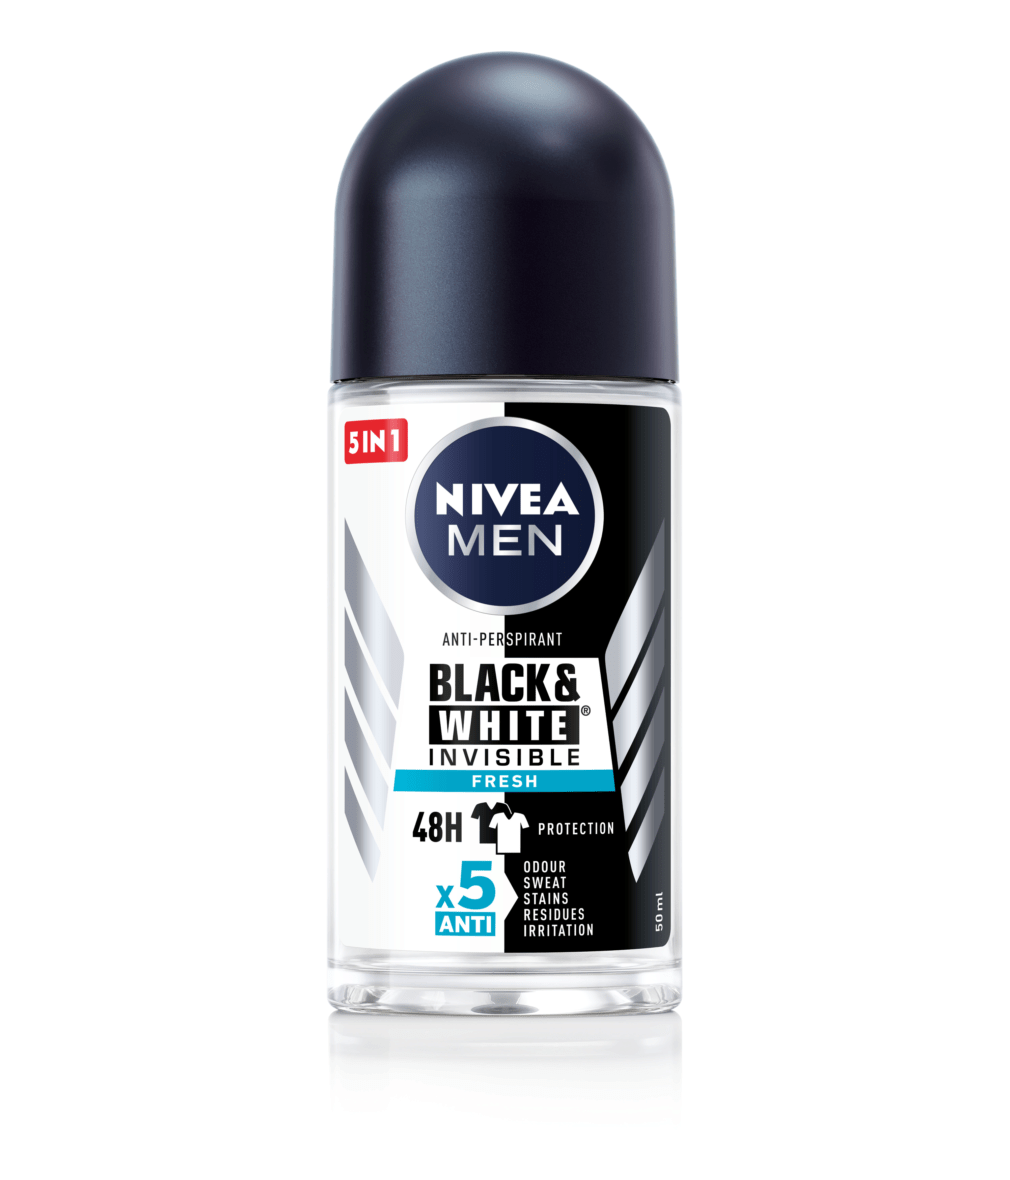 Nivea Black & White Anti-Perspirant for Women Roll On Invisible Silky  Smooth 50 ml Online at Best Price, Roll - Ons